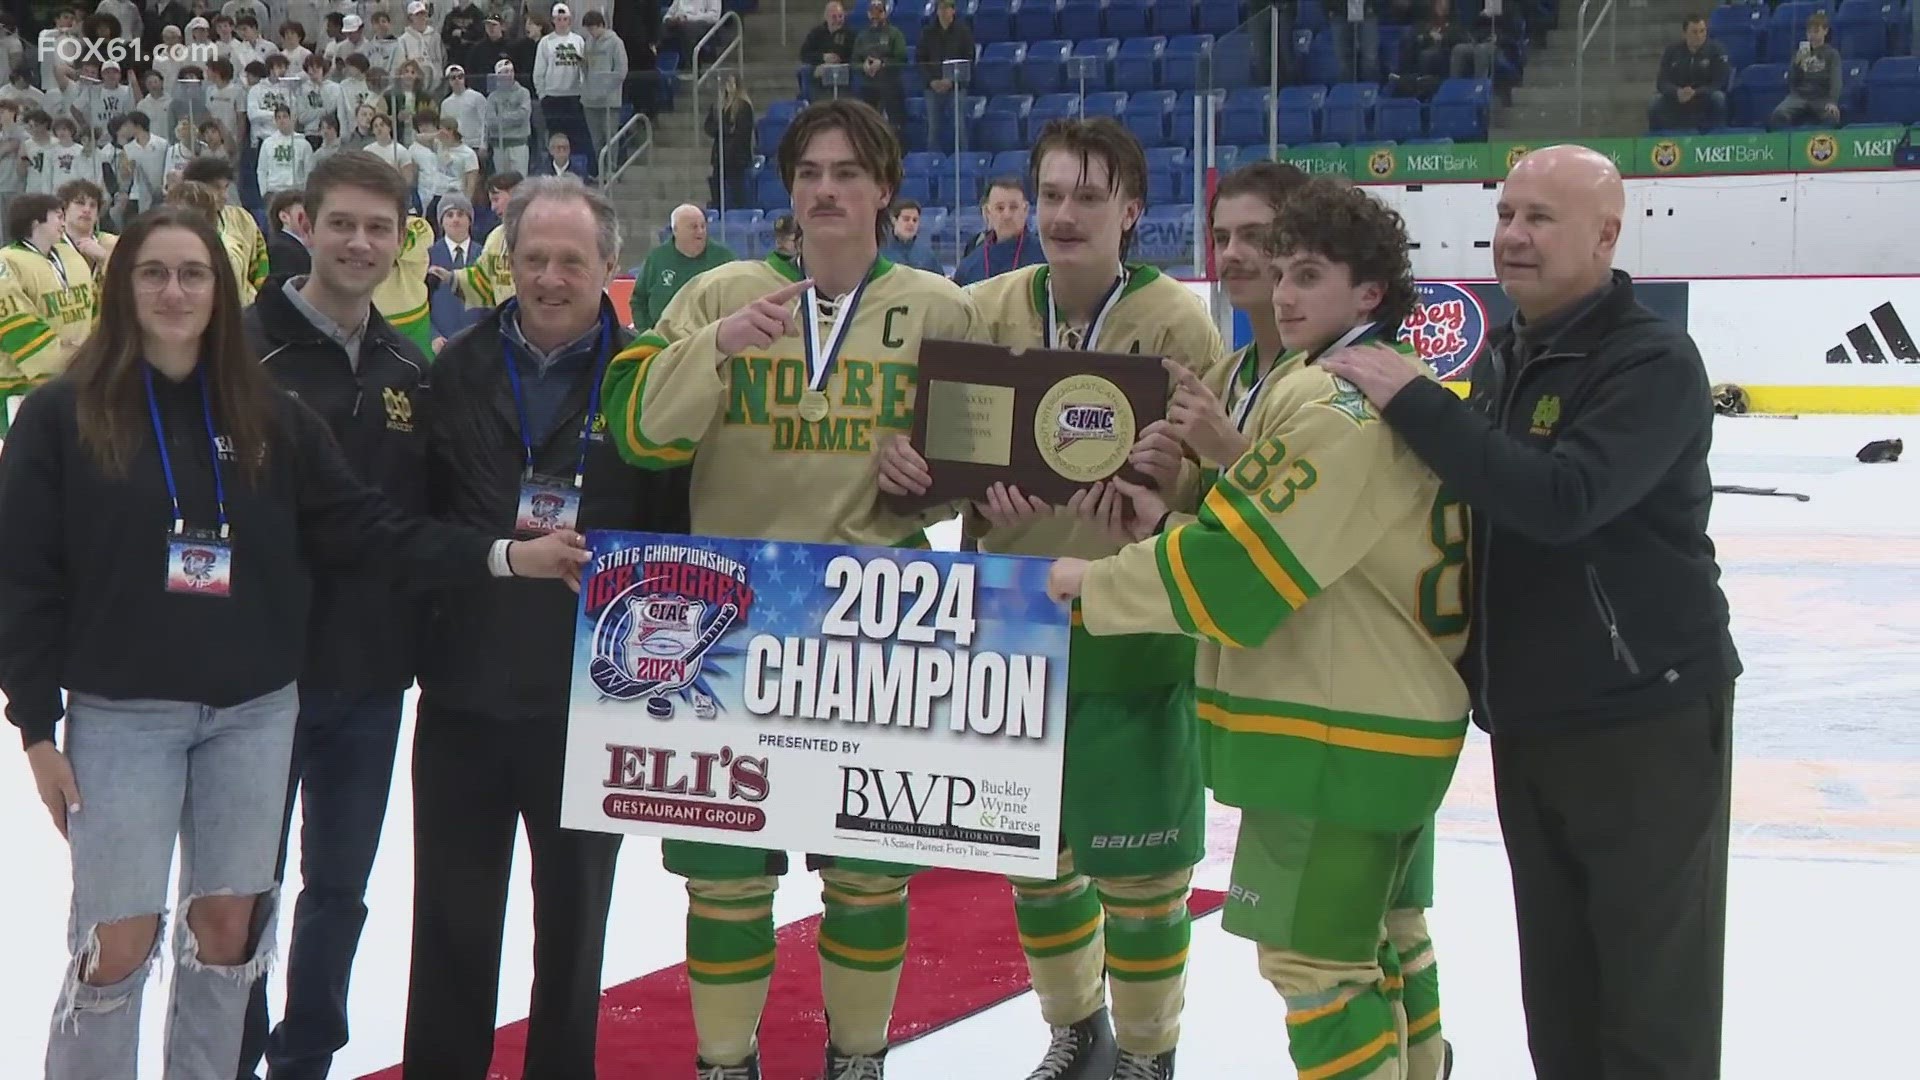 By a final score of 4-1, Notre Dame-West Haven outlasted New Canaan to win the CIAC Division I championship.